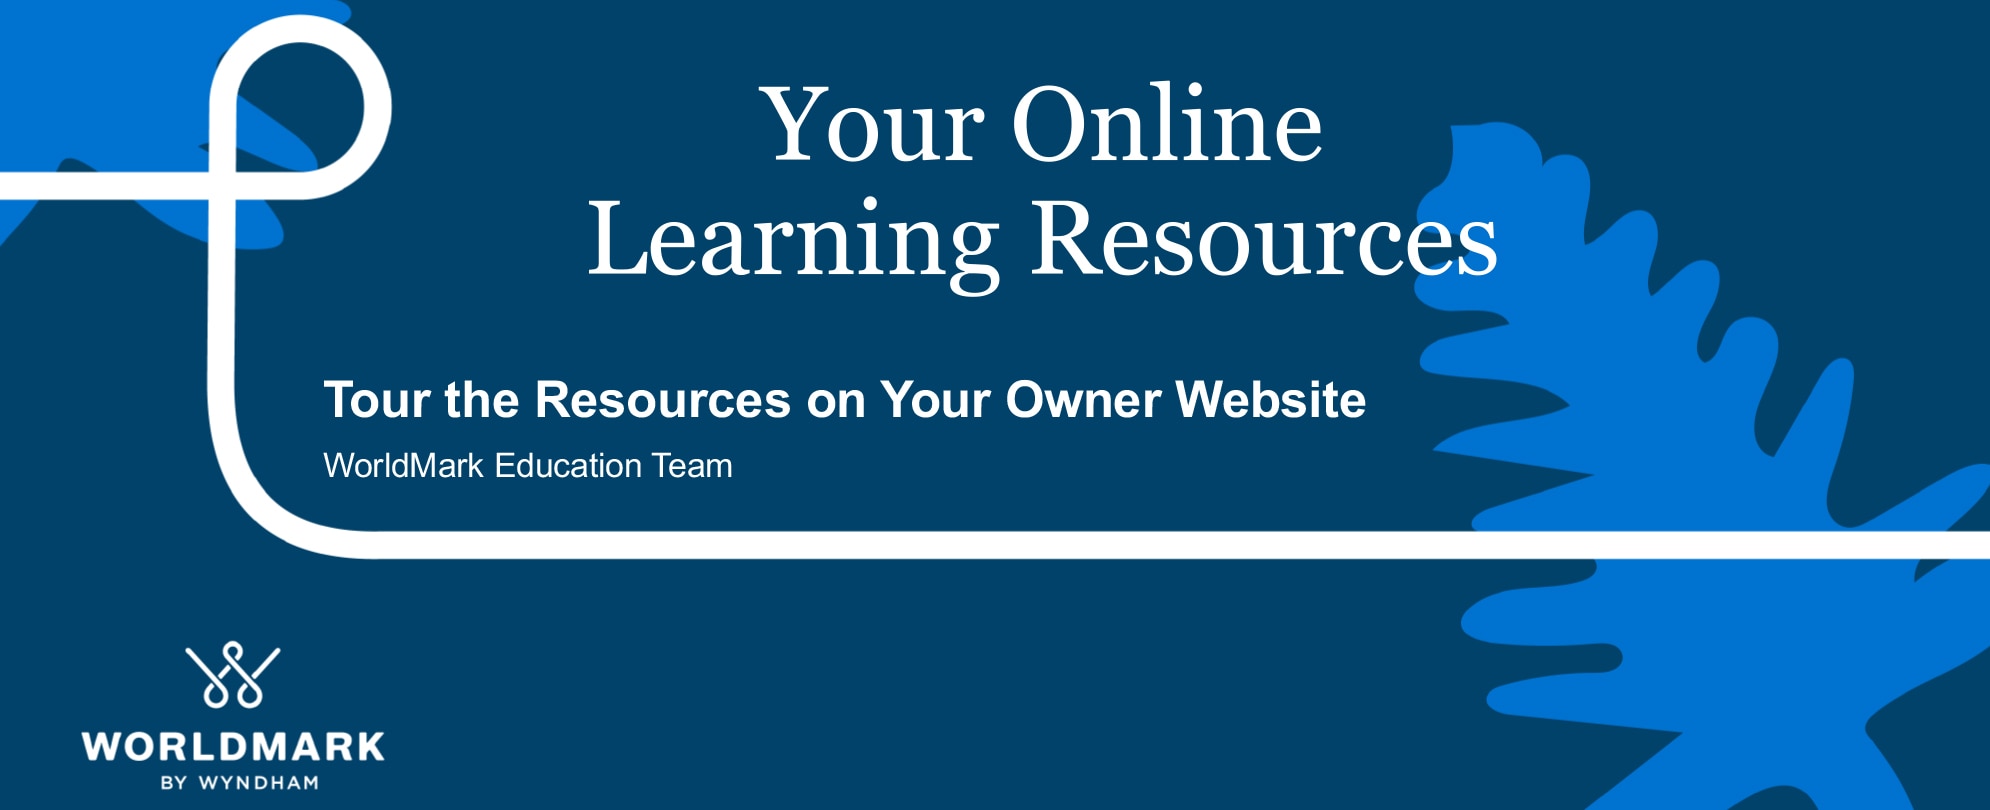 Your Online Learning Resources - Tour the resources on your owner website